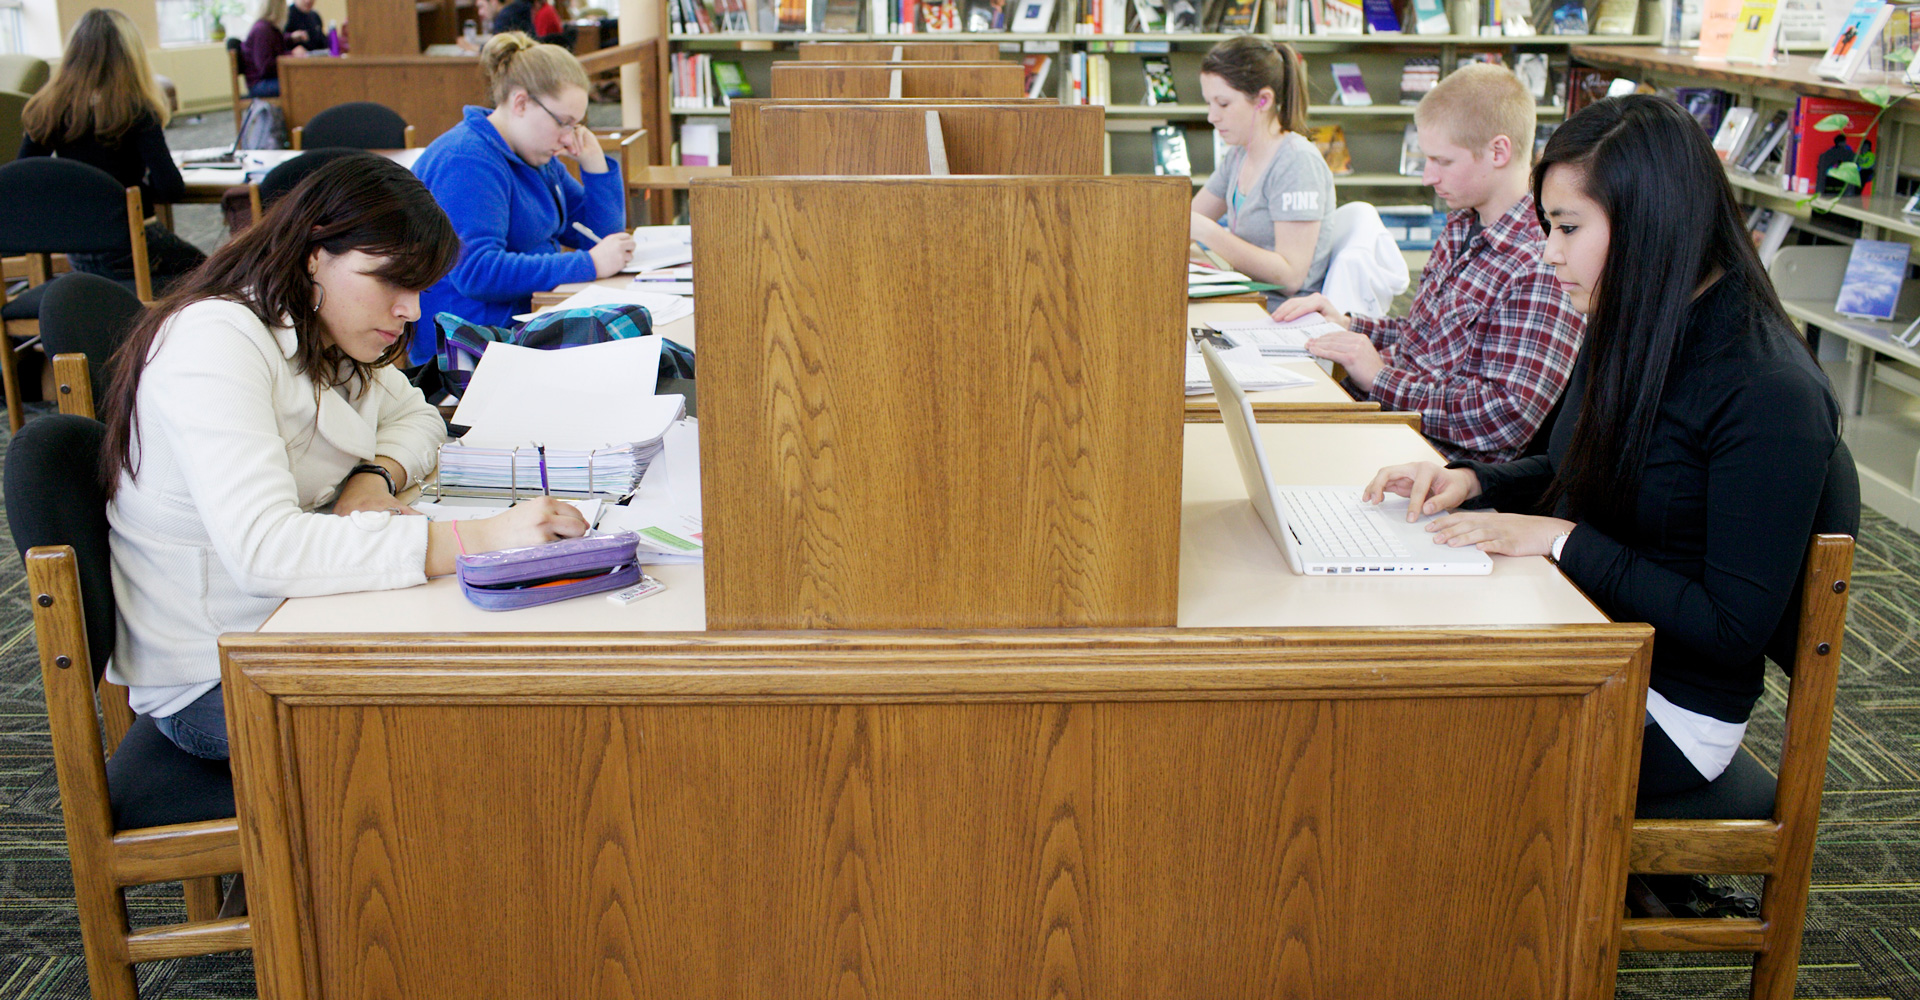 Students studying at the library.